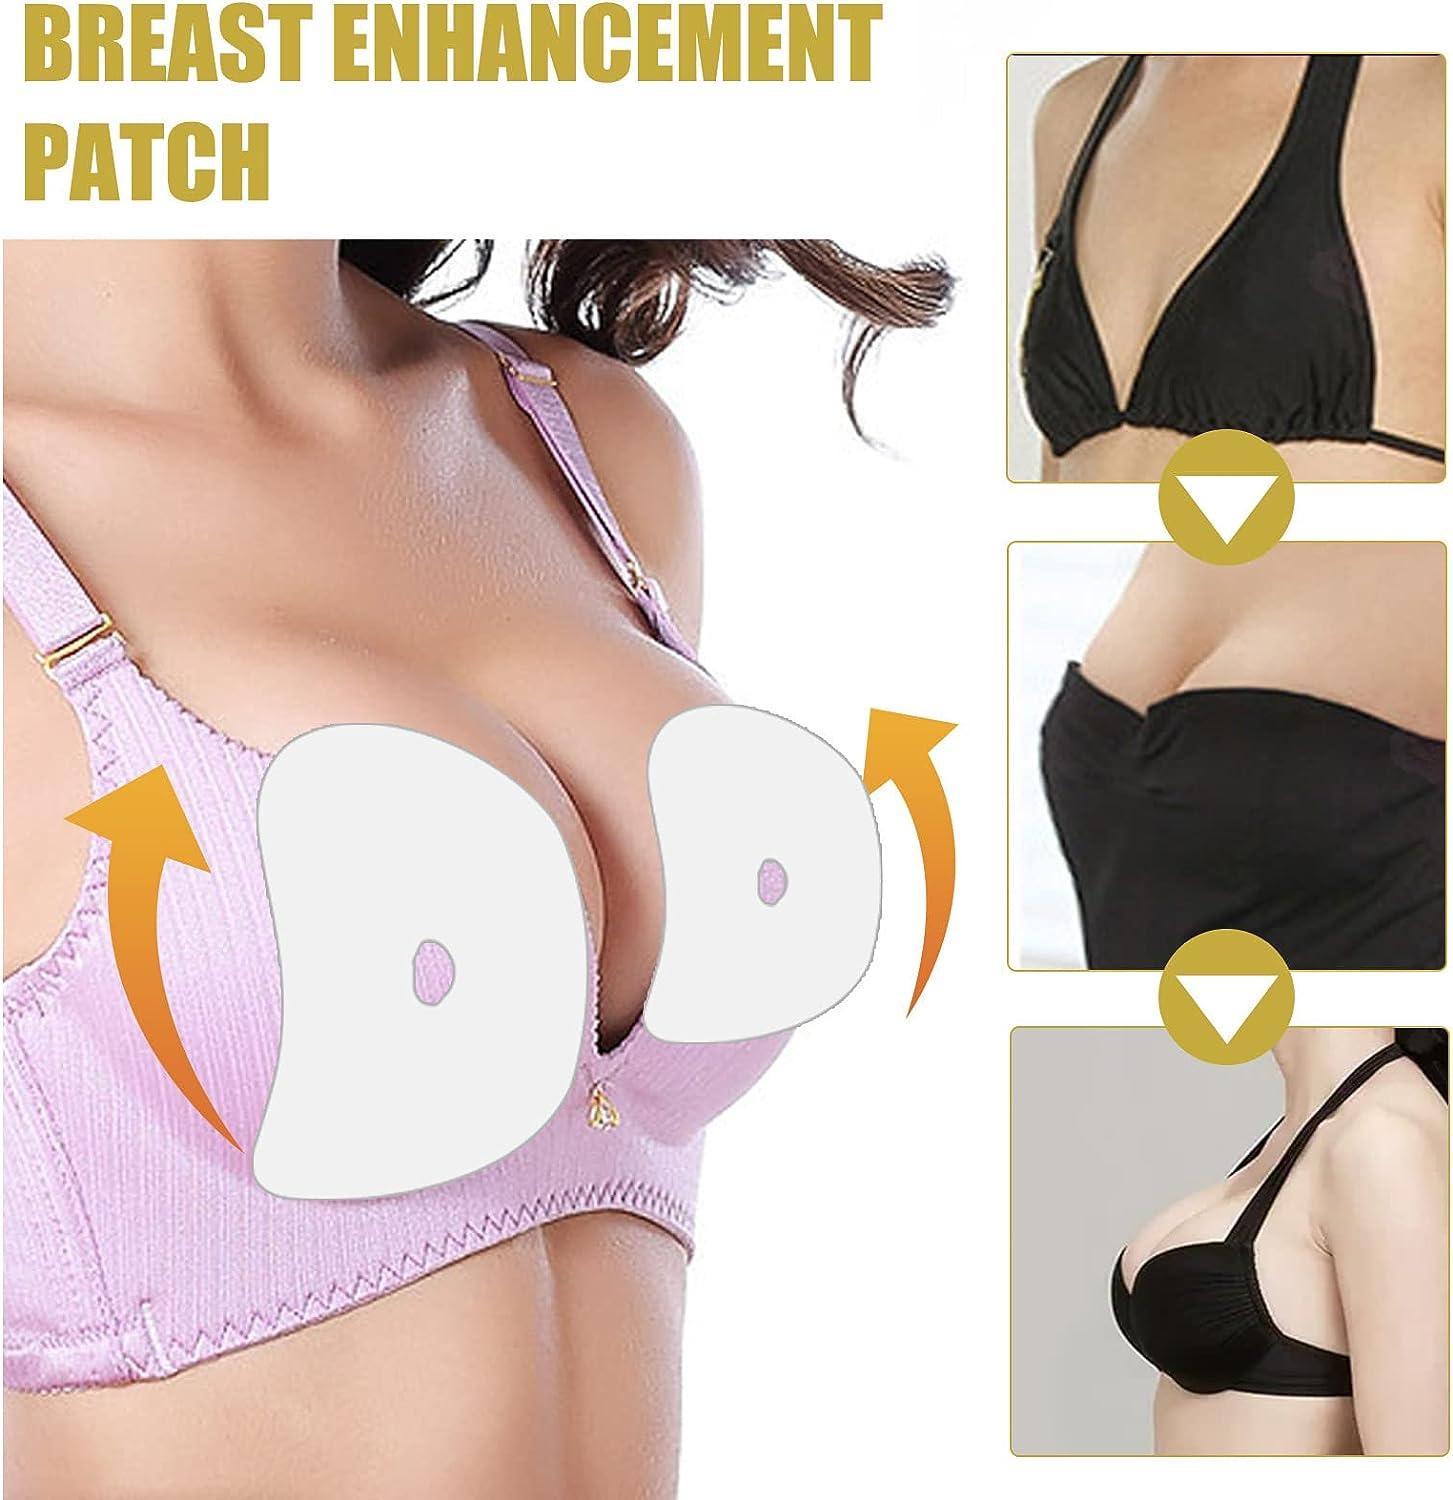 Breast Enhancement Patch, DYCECO Breast Enhancement Patch, Flysmus  Plumpamore Enhancement Patch, Breast Enhancement Mask, Fiitobeauty Breast